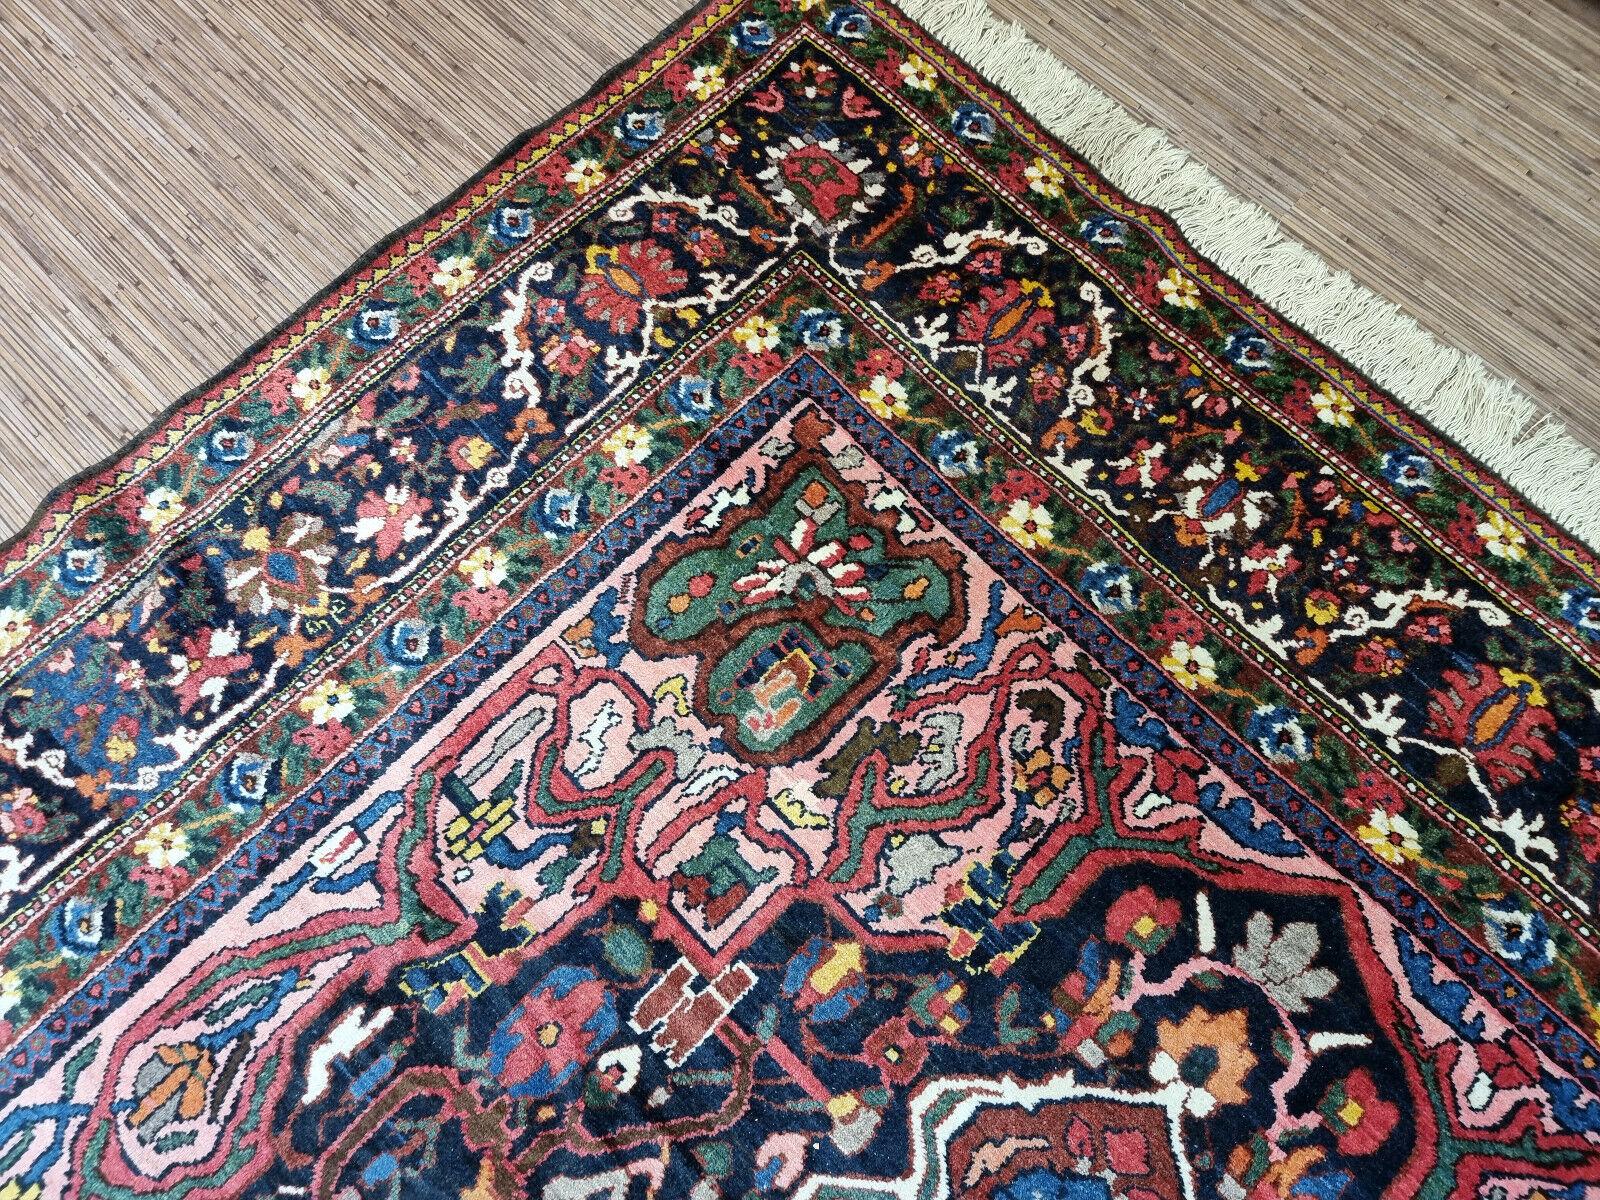 Wool Handmade Antique Persian Style Bakhtiari Rug 7.2' x 13.2', 1920s - 1D74 For Sale